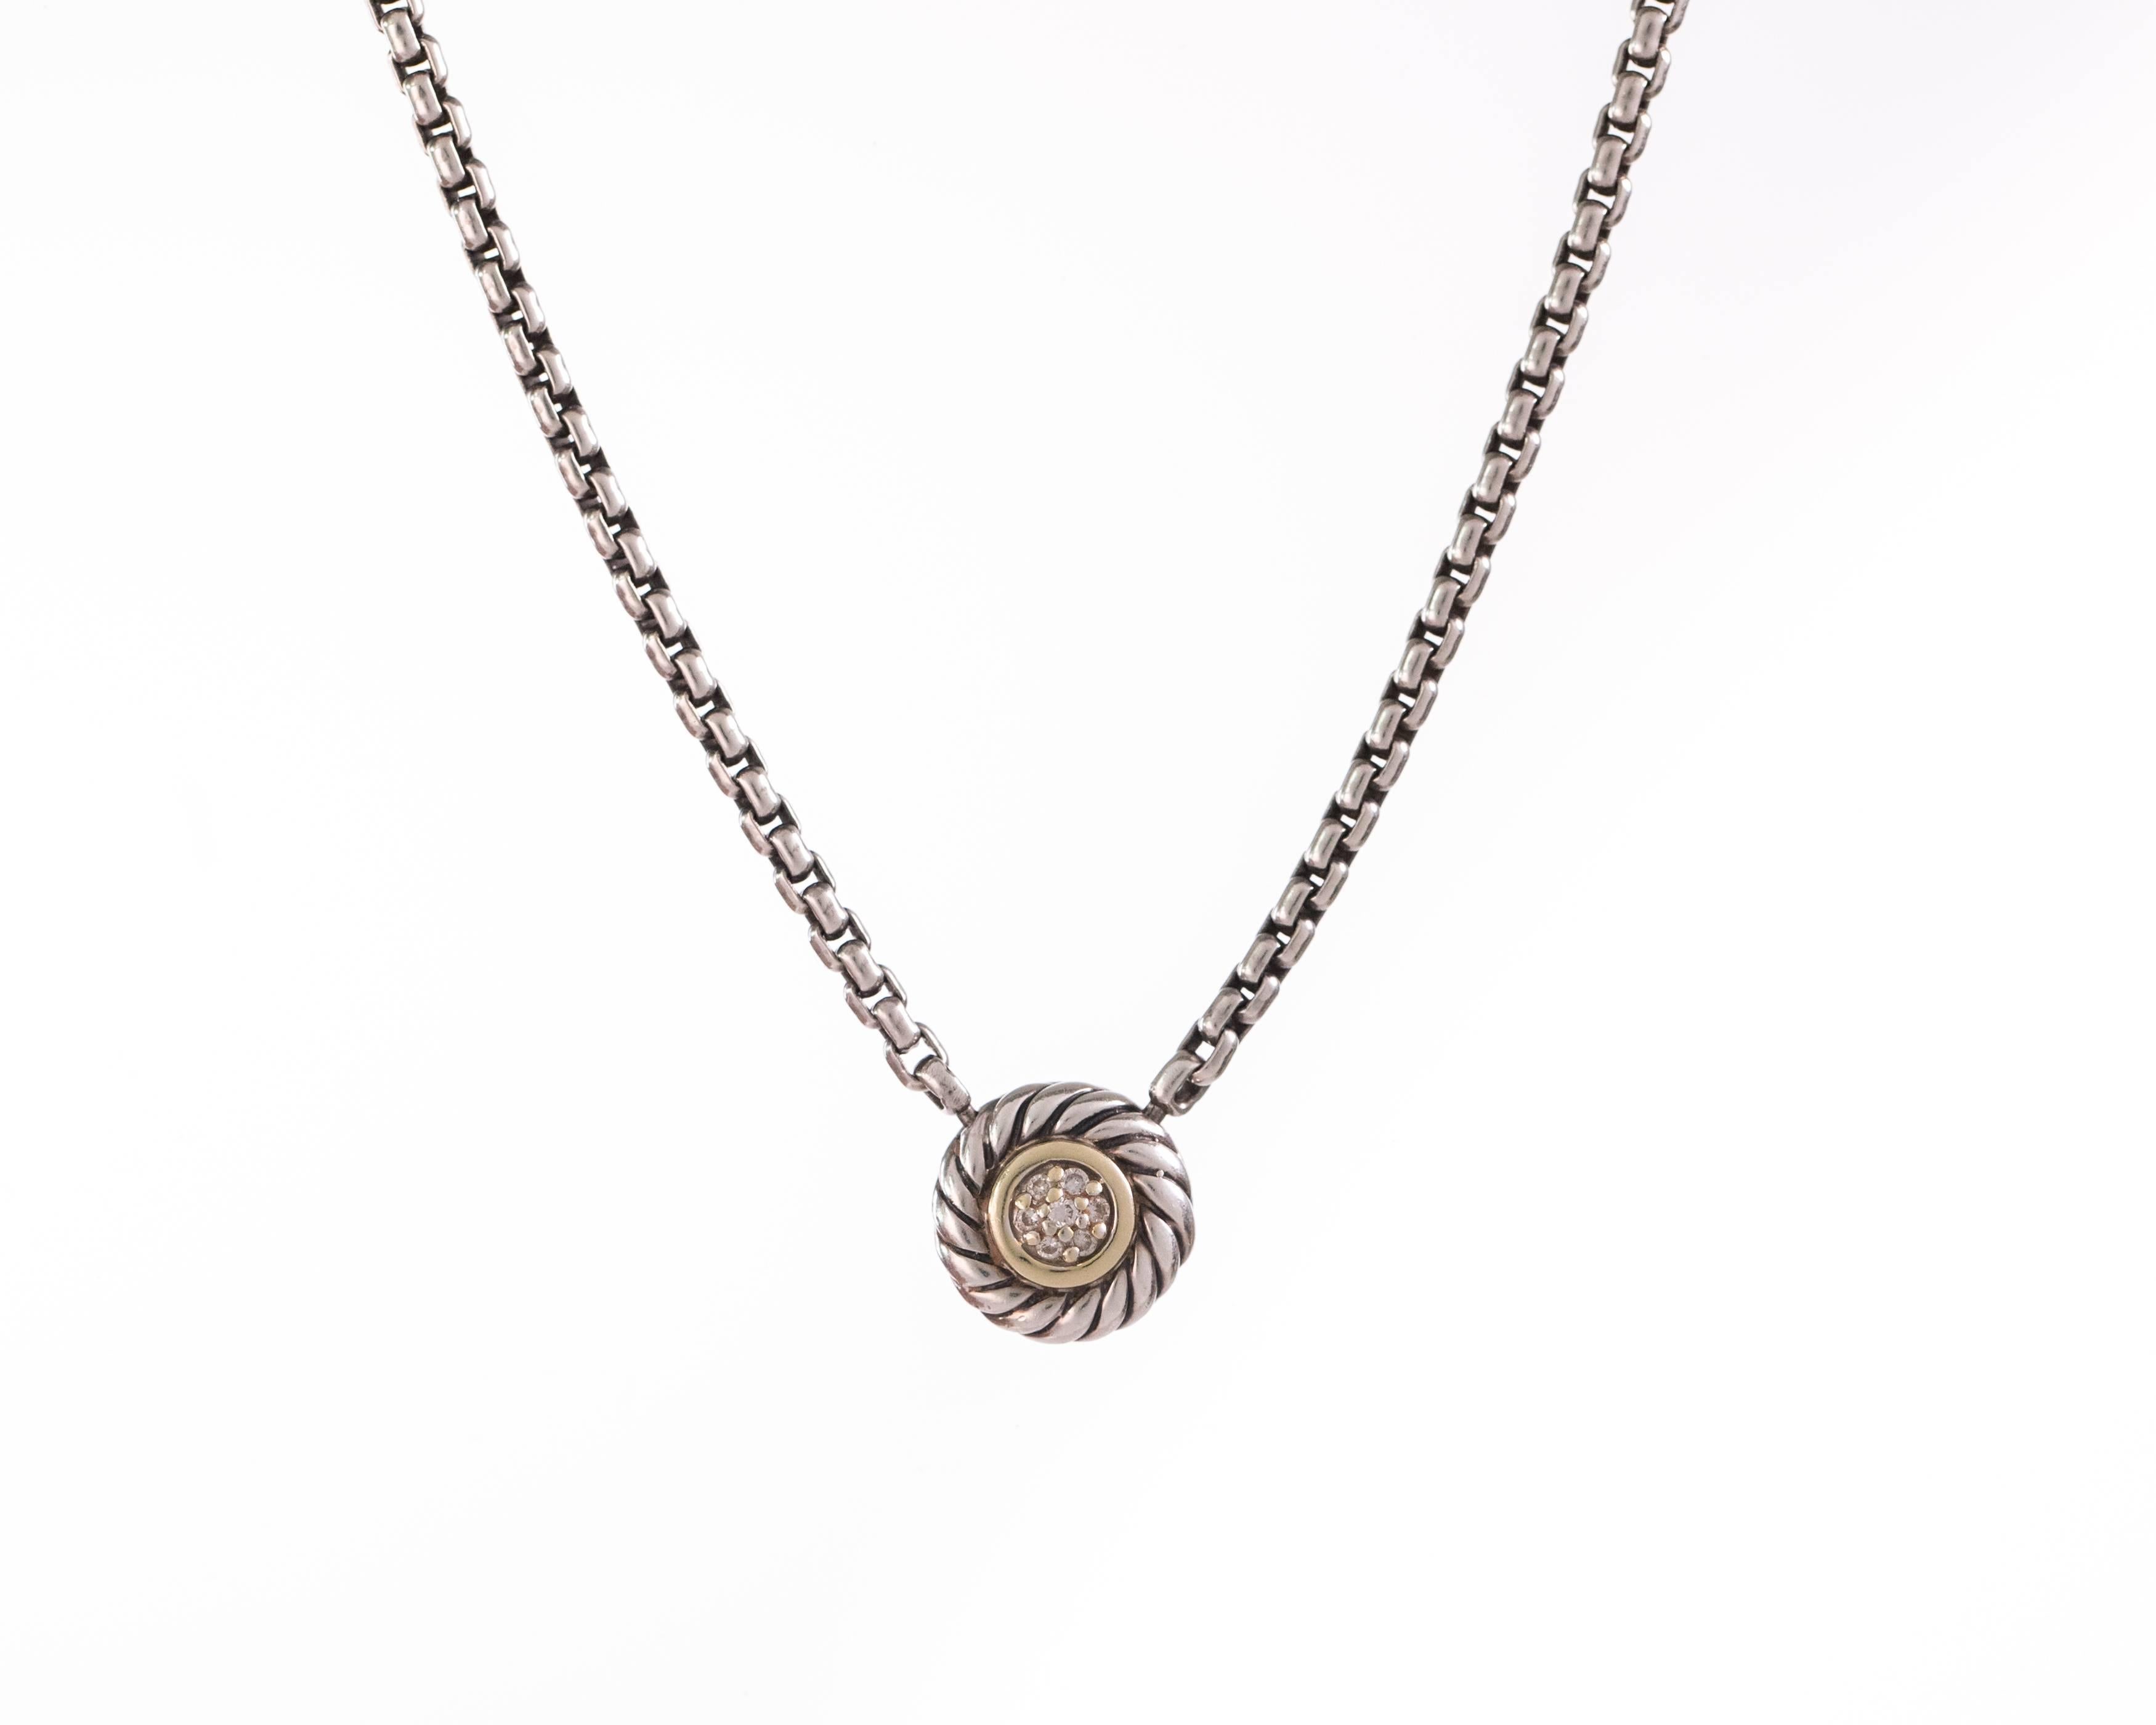 This early 2000s David Yurman 18 karat yellow gold and sterling silver Cookie pendant necklace is a classic to wear and treasure always. 

It features 0.10 carats of round brilliant diamonds, a box chain and a lobster clasp closure. It measures